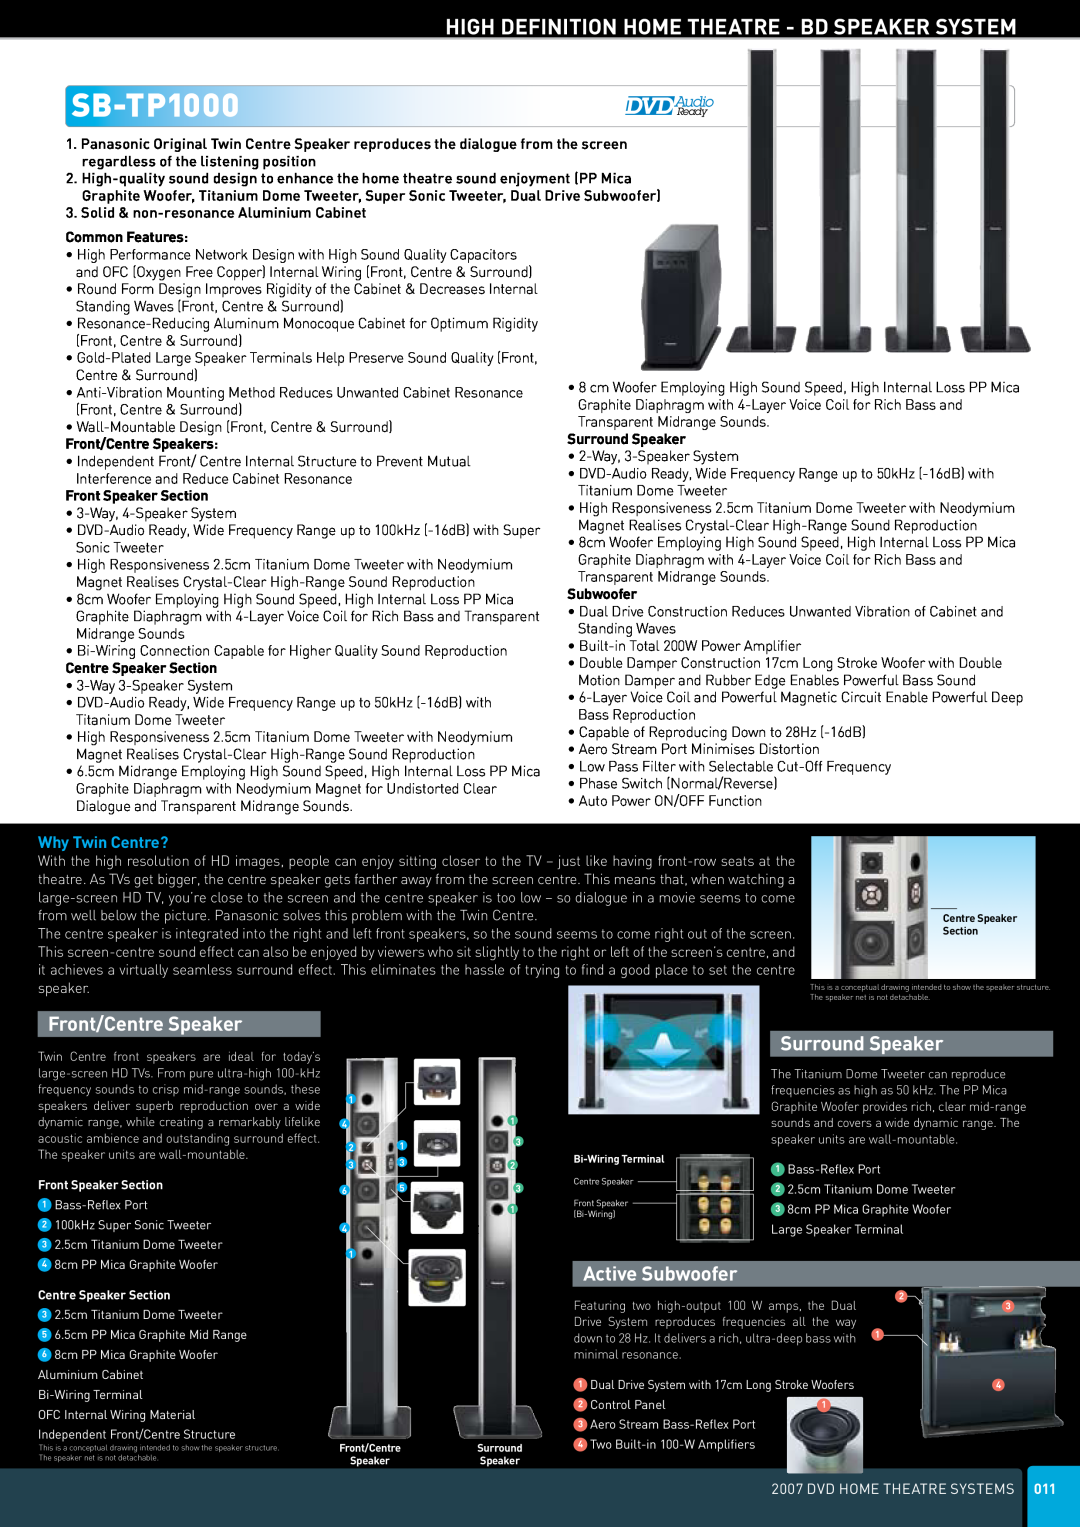 Panasonic DVD Home Theatre System manual SB-TP1000, High Definition Home Theatre - Bd Speaker System, Front/Centre Speaker 